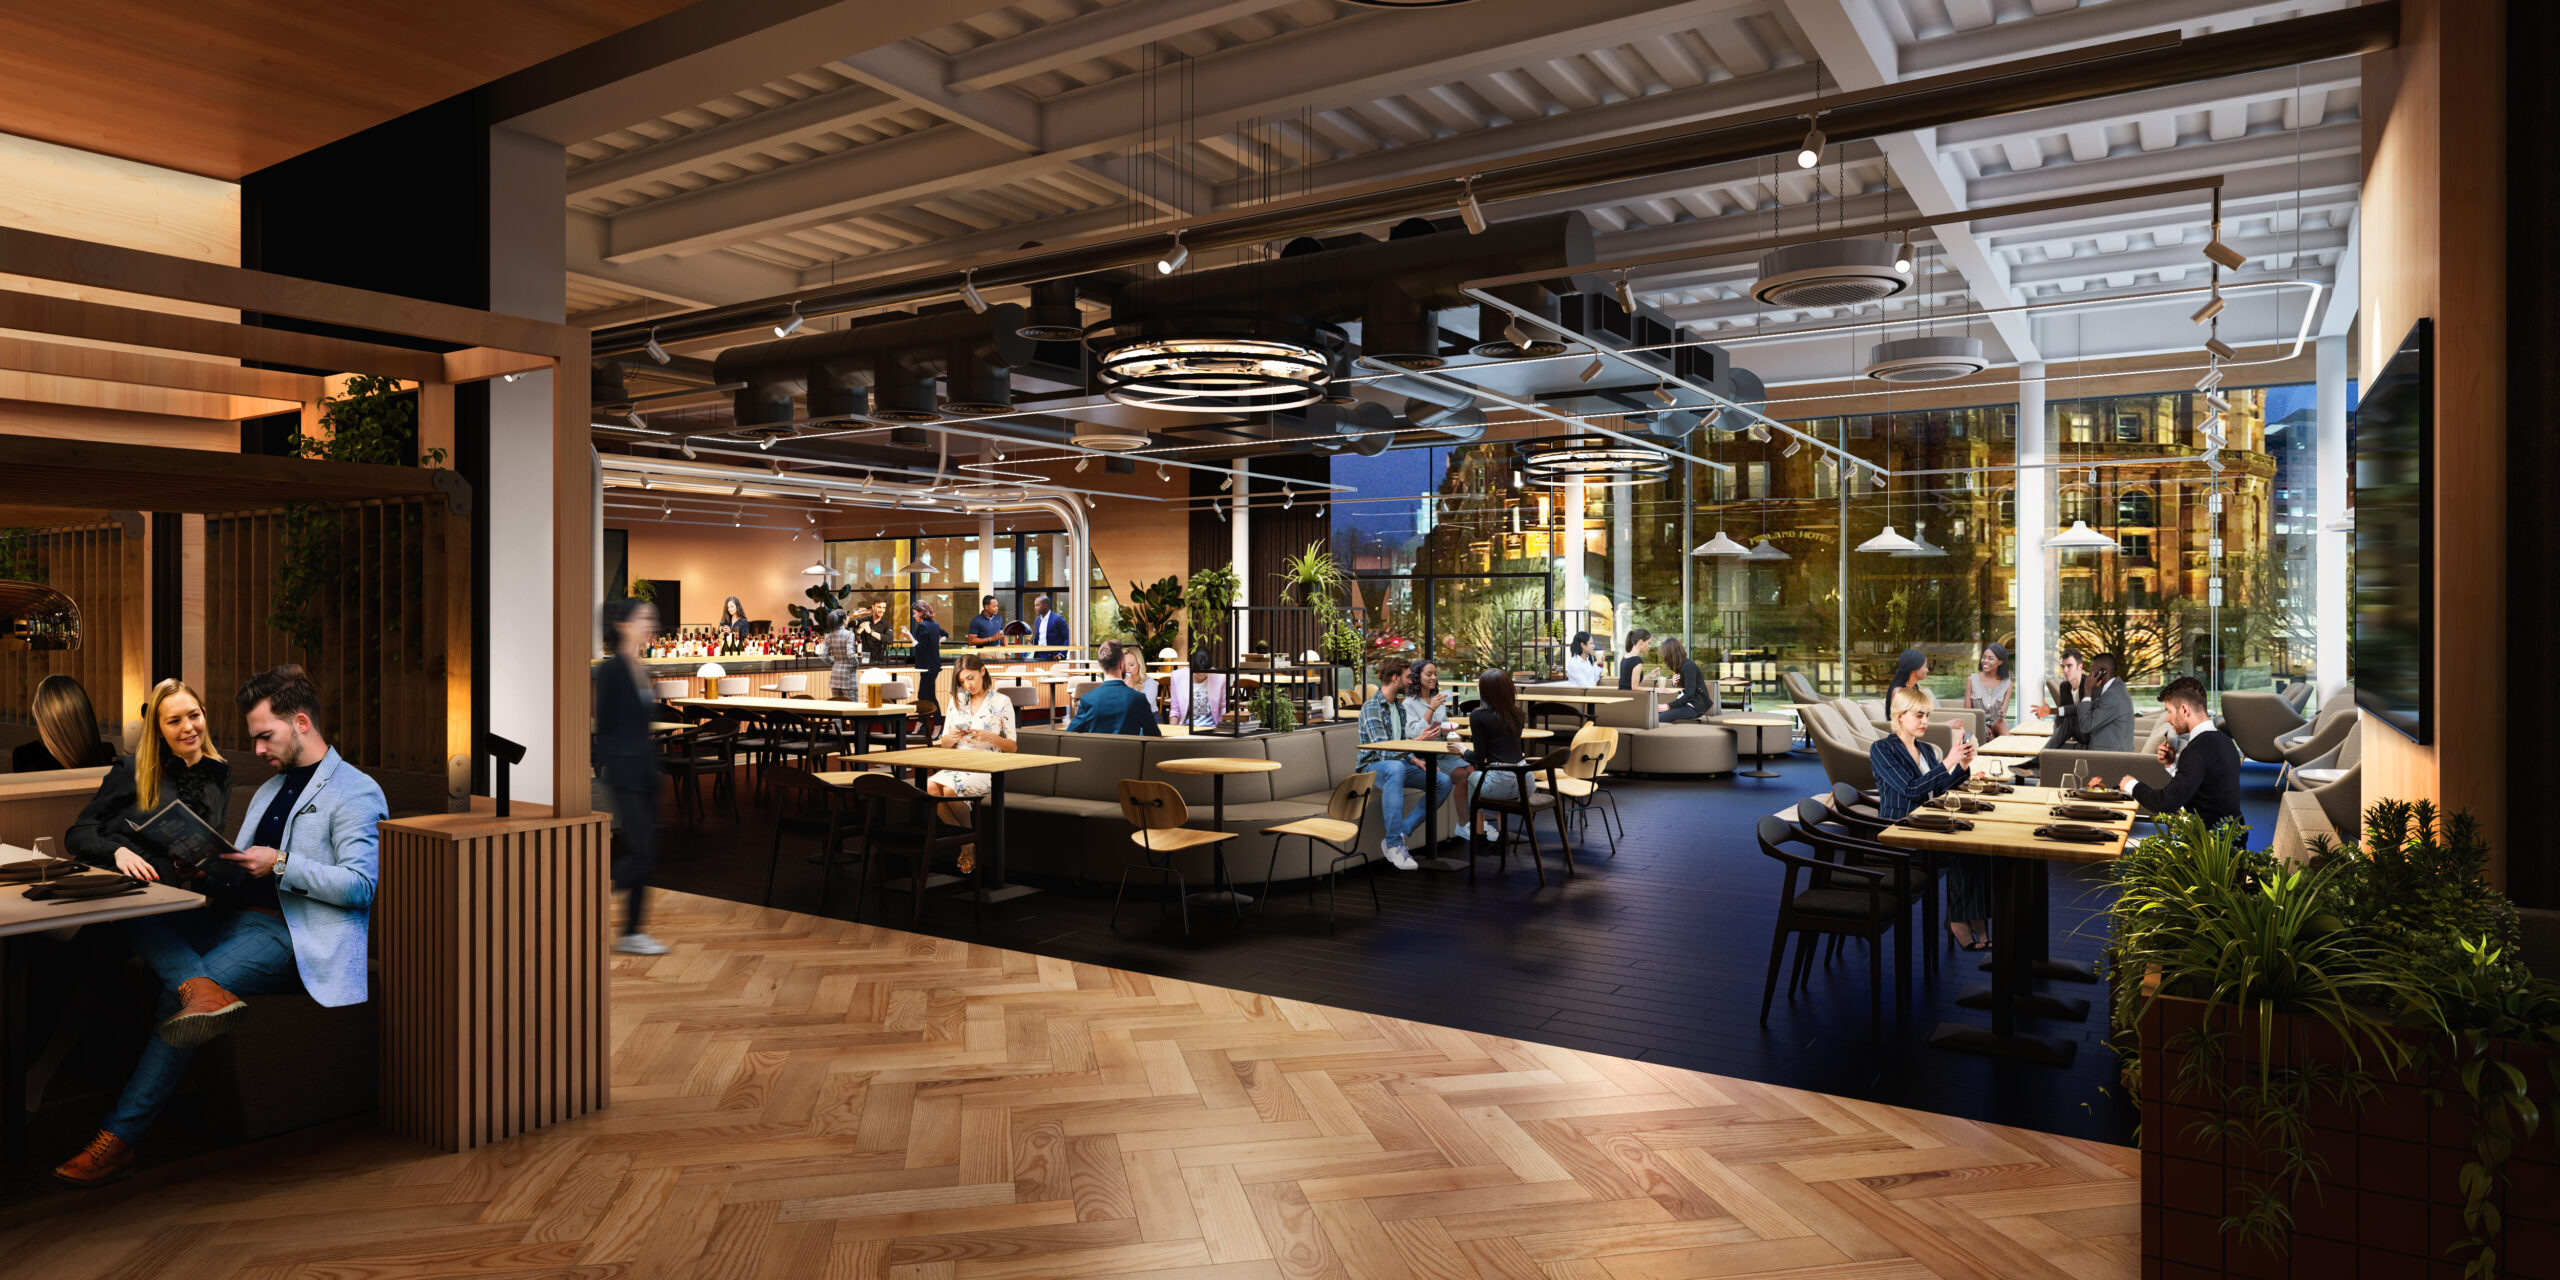 Junction is a new restaurant that's set to open at Manchester Central. Credit: Supplied